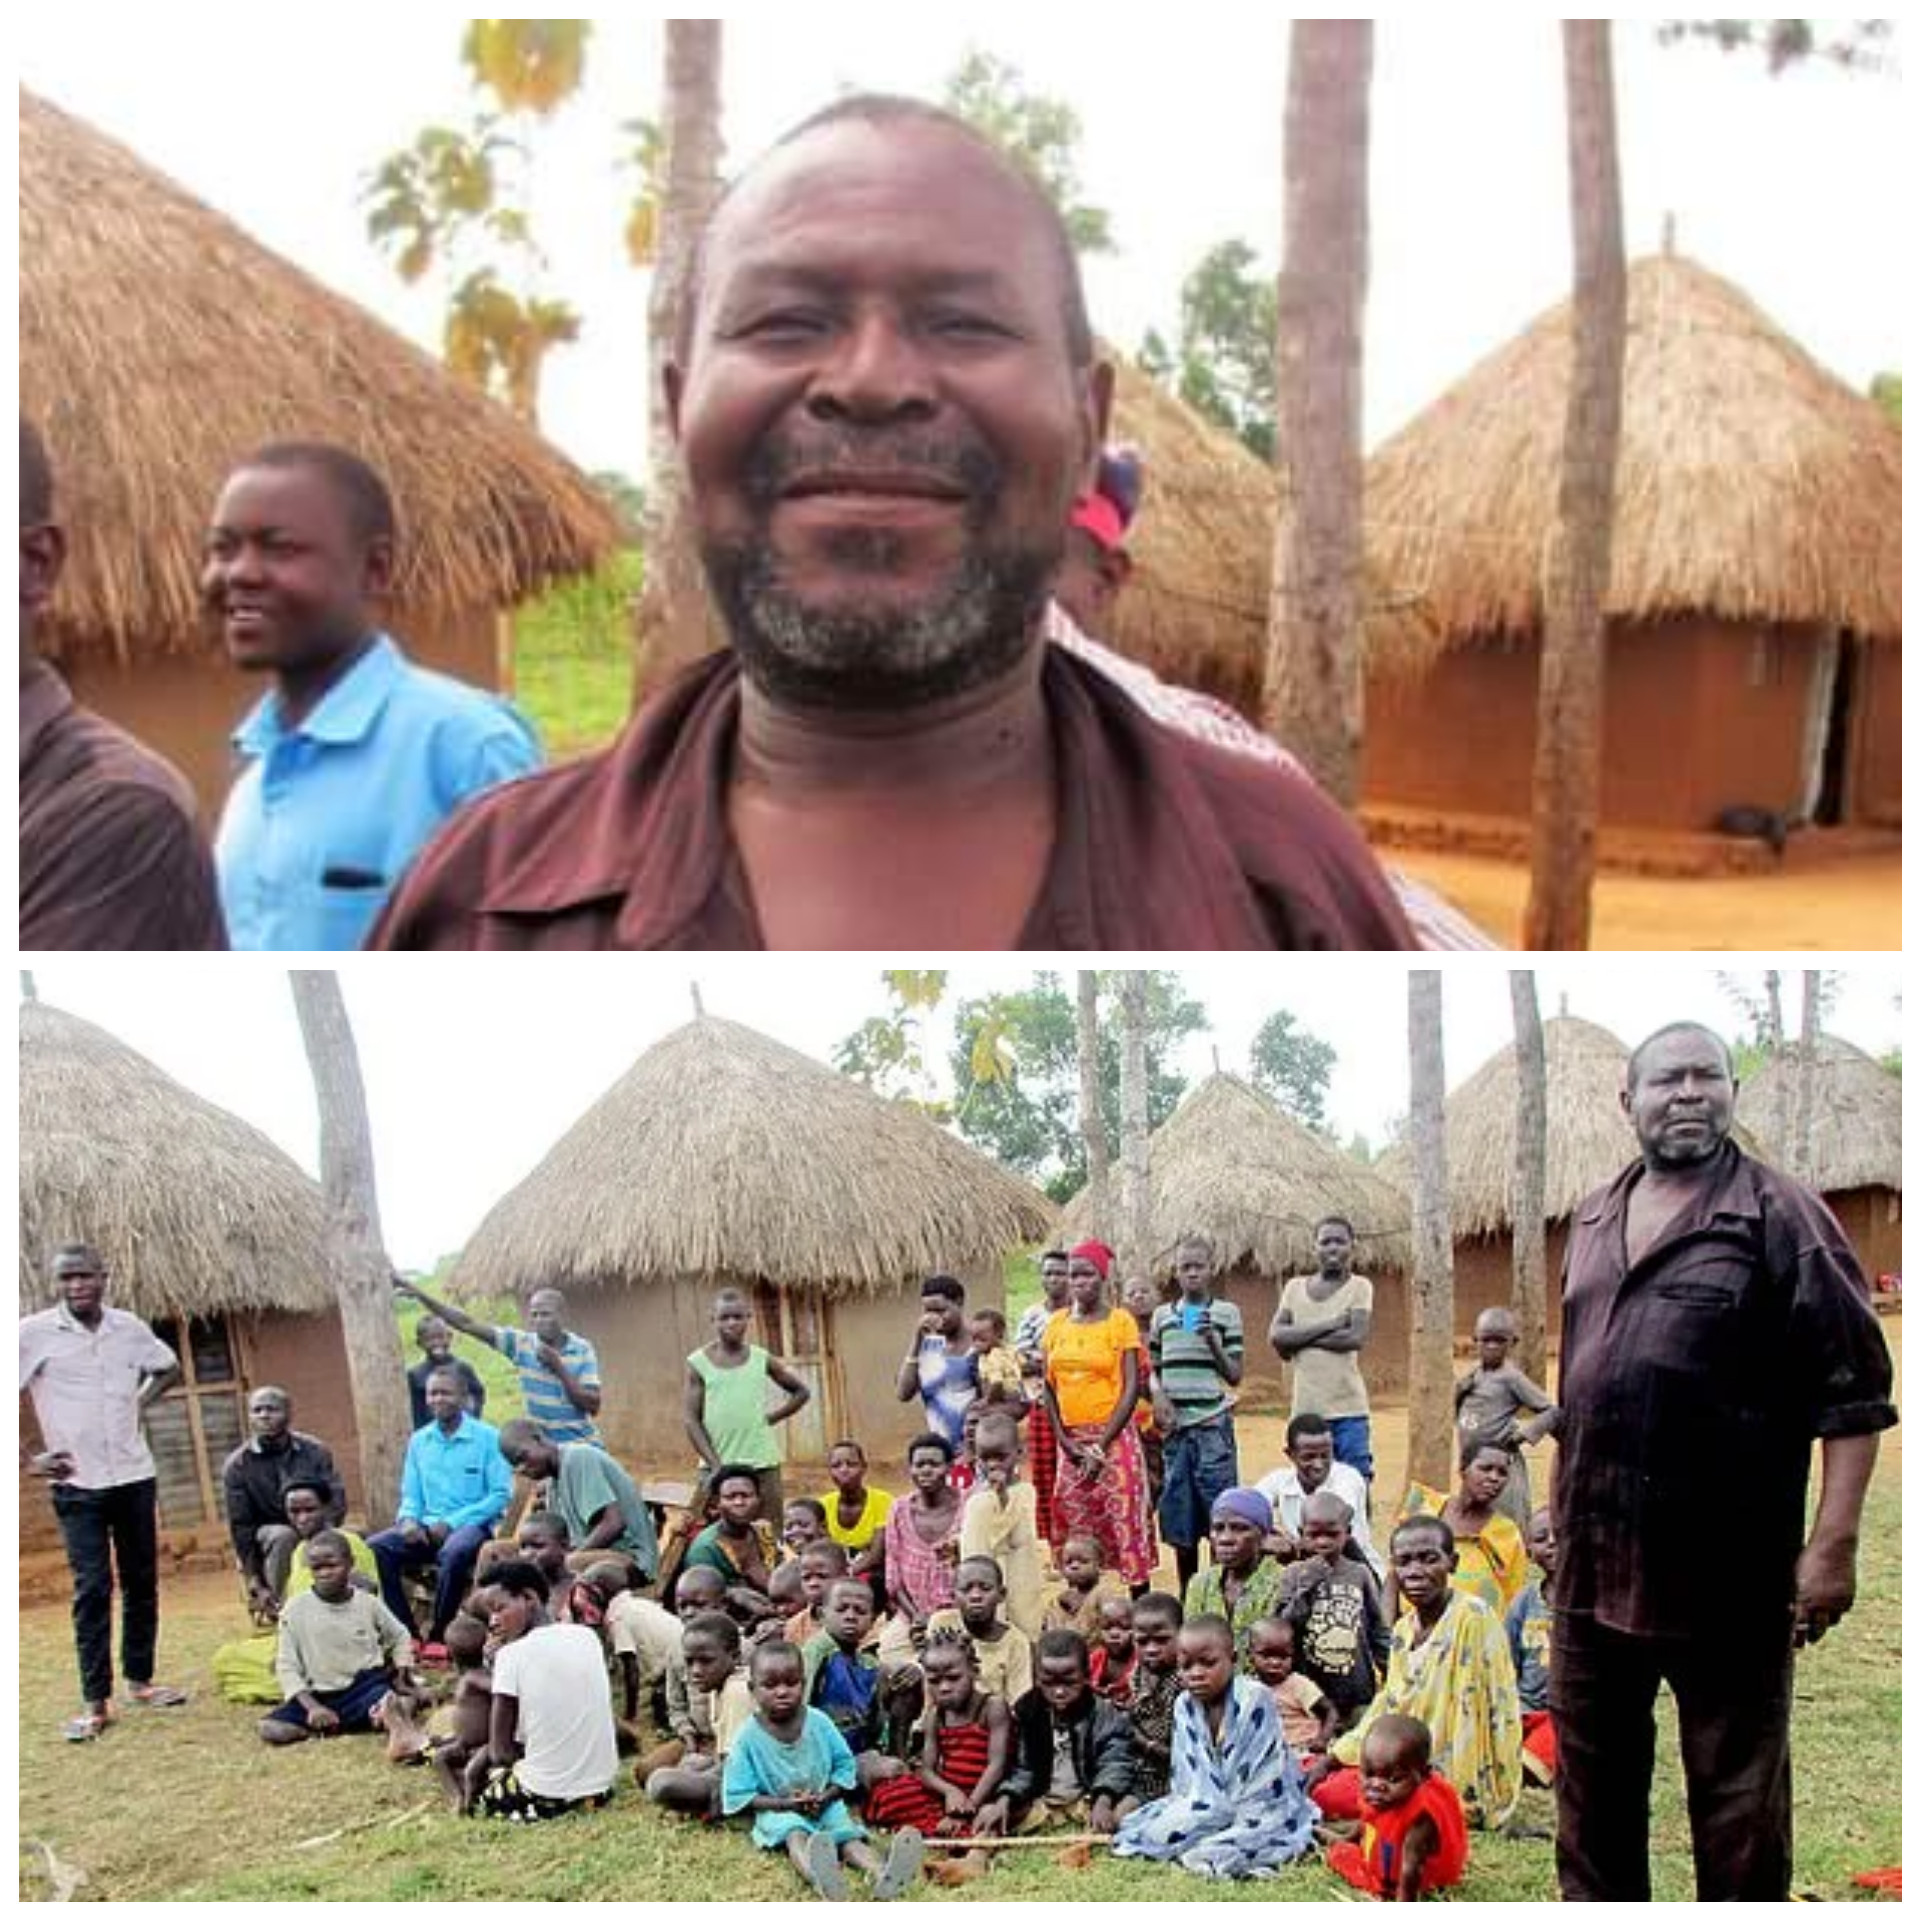 Two of my 12 wives abandoned me because I could not afford basic needs – Ugandan man with 102 children and 578 grandchildren laments hardship